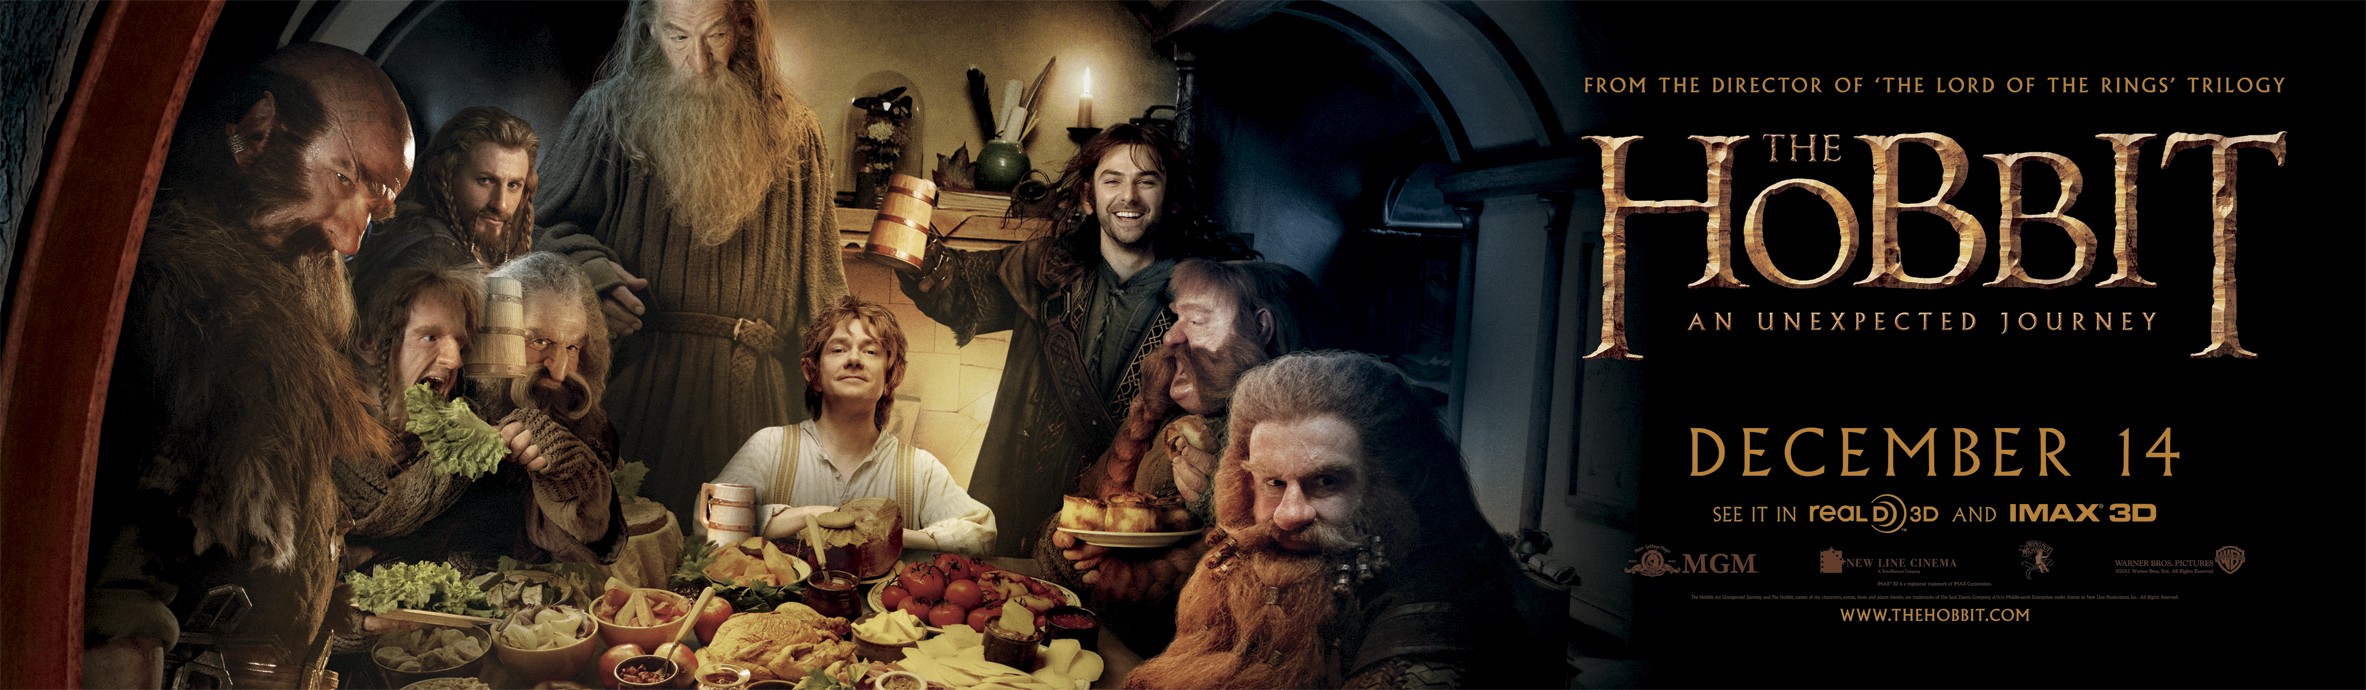 Mega Sized Movie Poster Image for The Hobbit: An Unexpected Journey (#9 of 39)